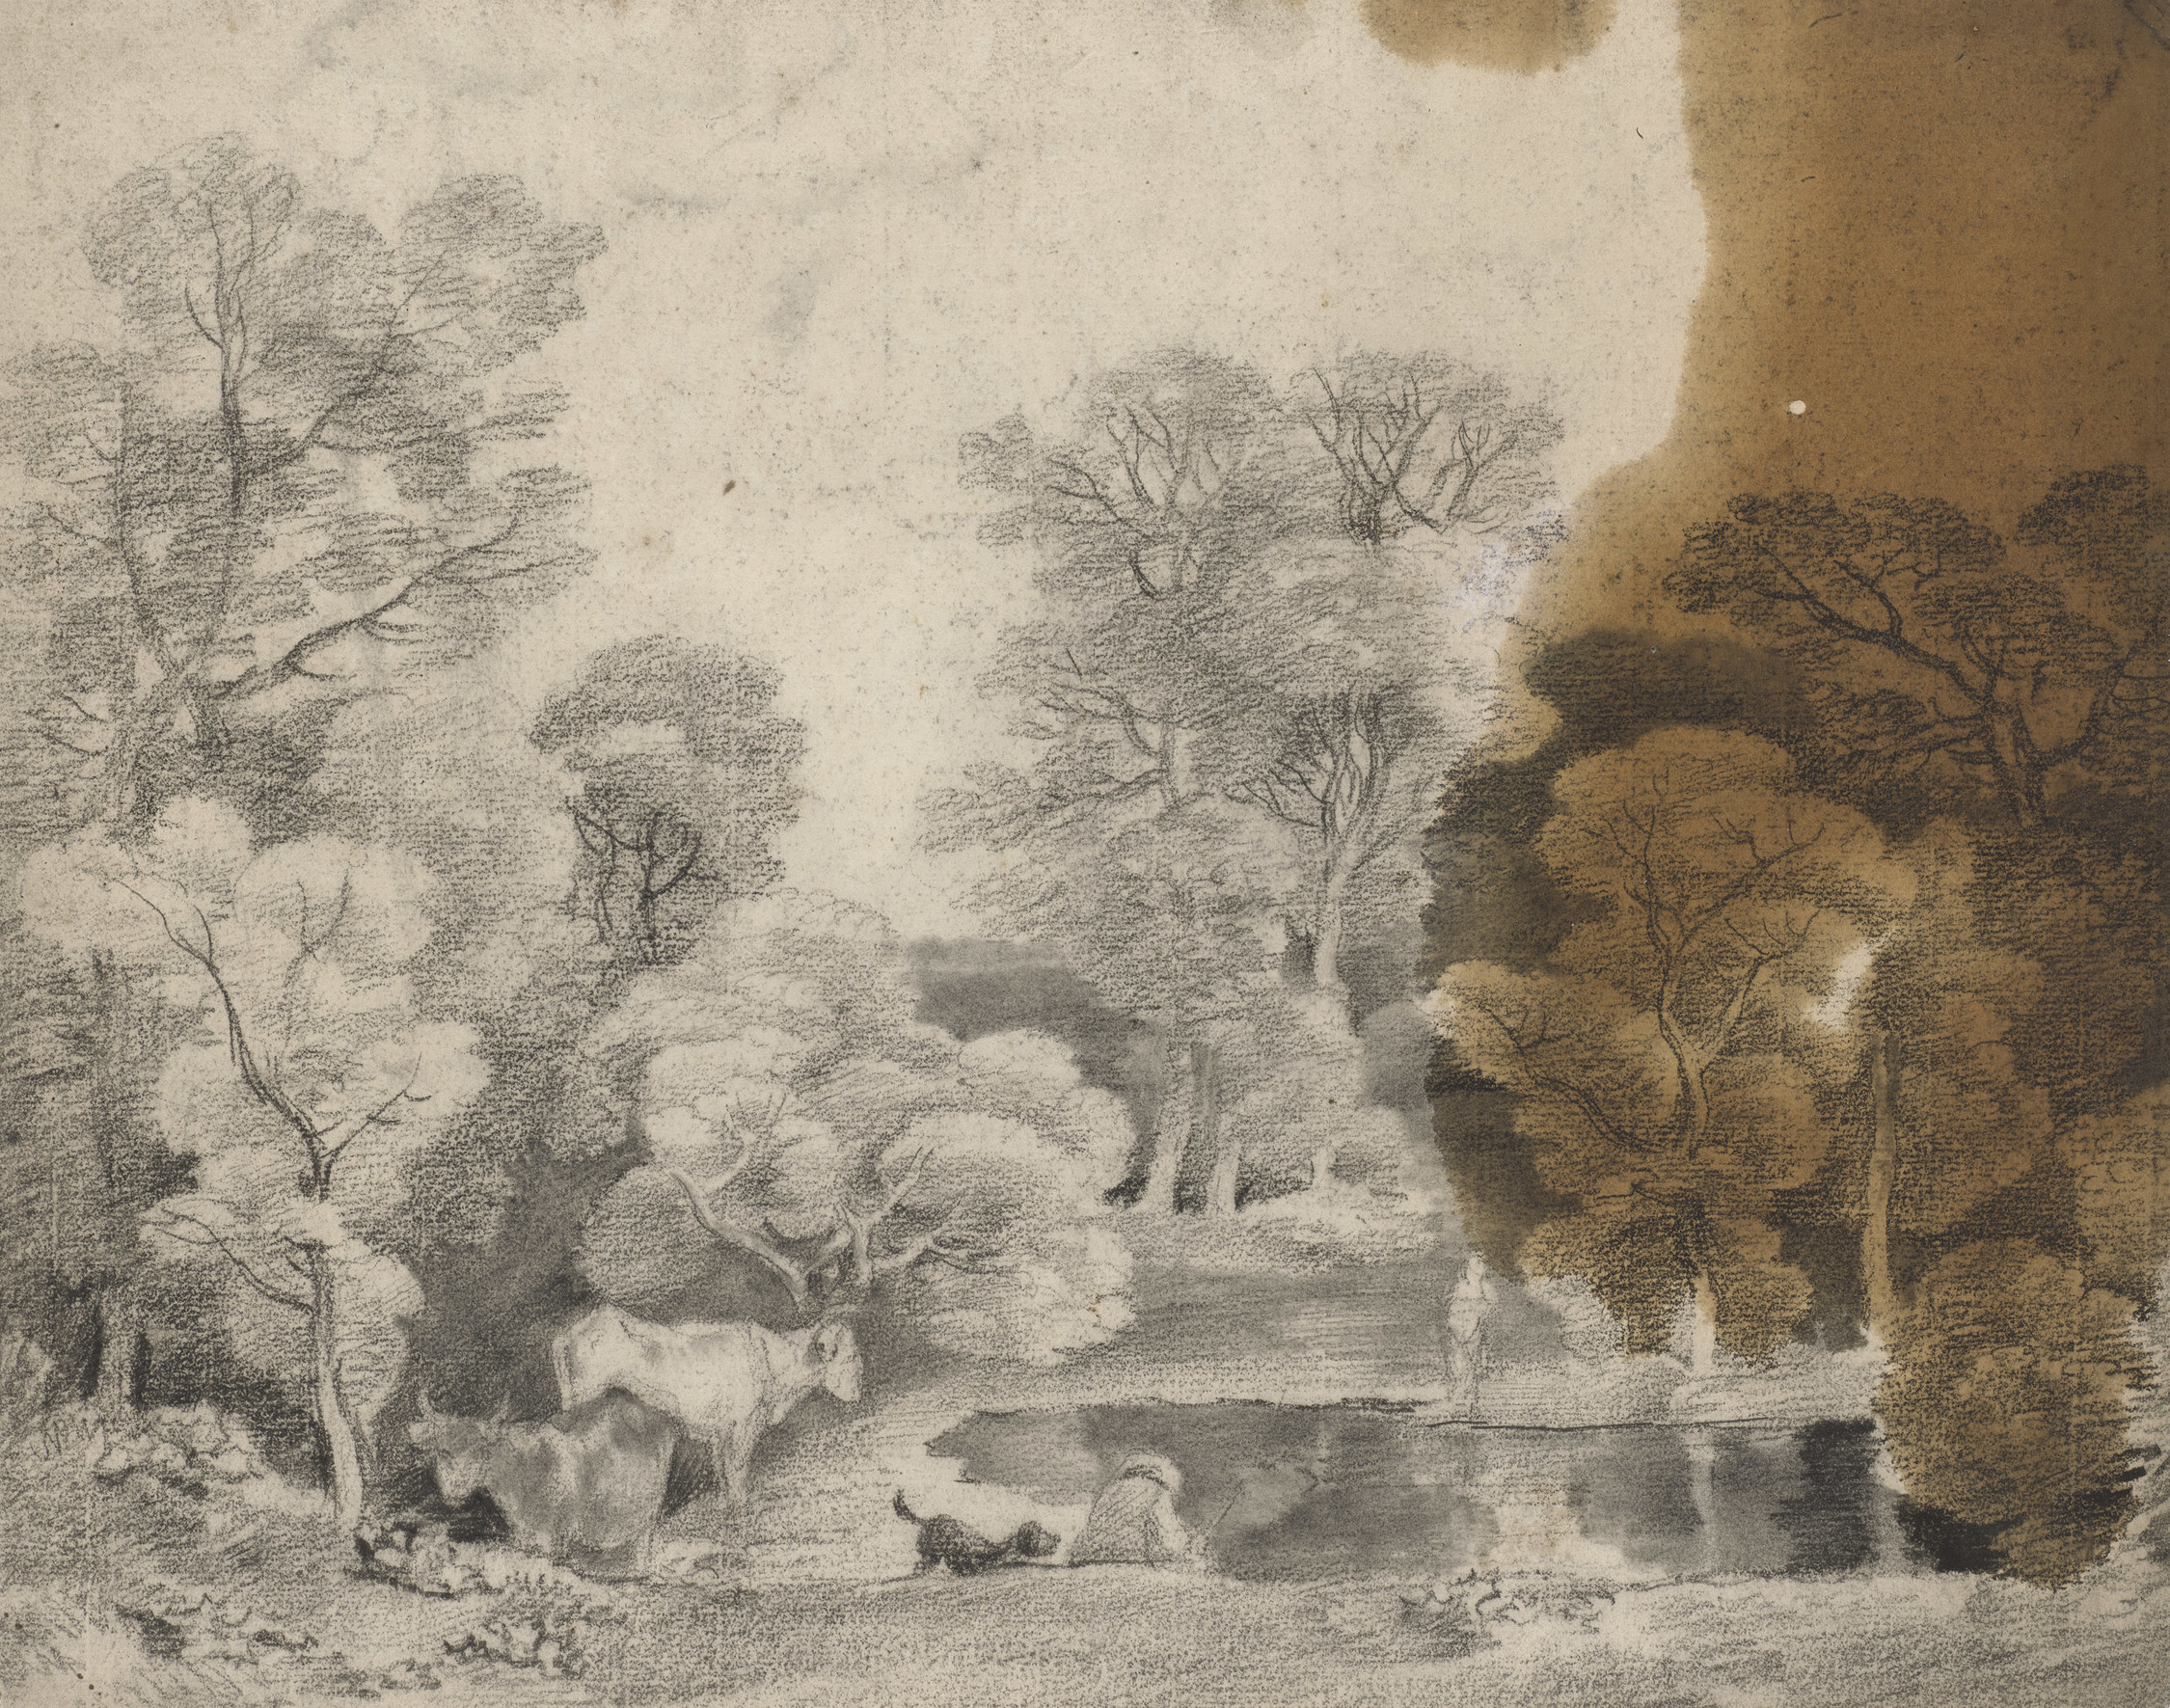 A drawing in black chalk and stump&nbsp;showing trees and a lake, with cows at the water's edge, and a man and his dog.&nbsp;Large oil stain&nbsp;to right. On the verso, another landscape study.
This drawing is one of 25 landscape drawings in the Royal Co